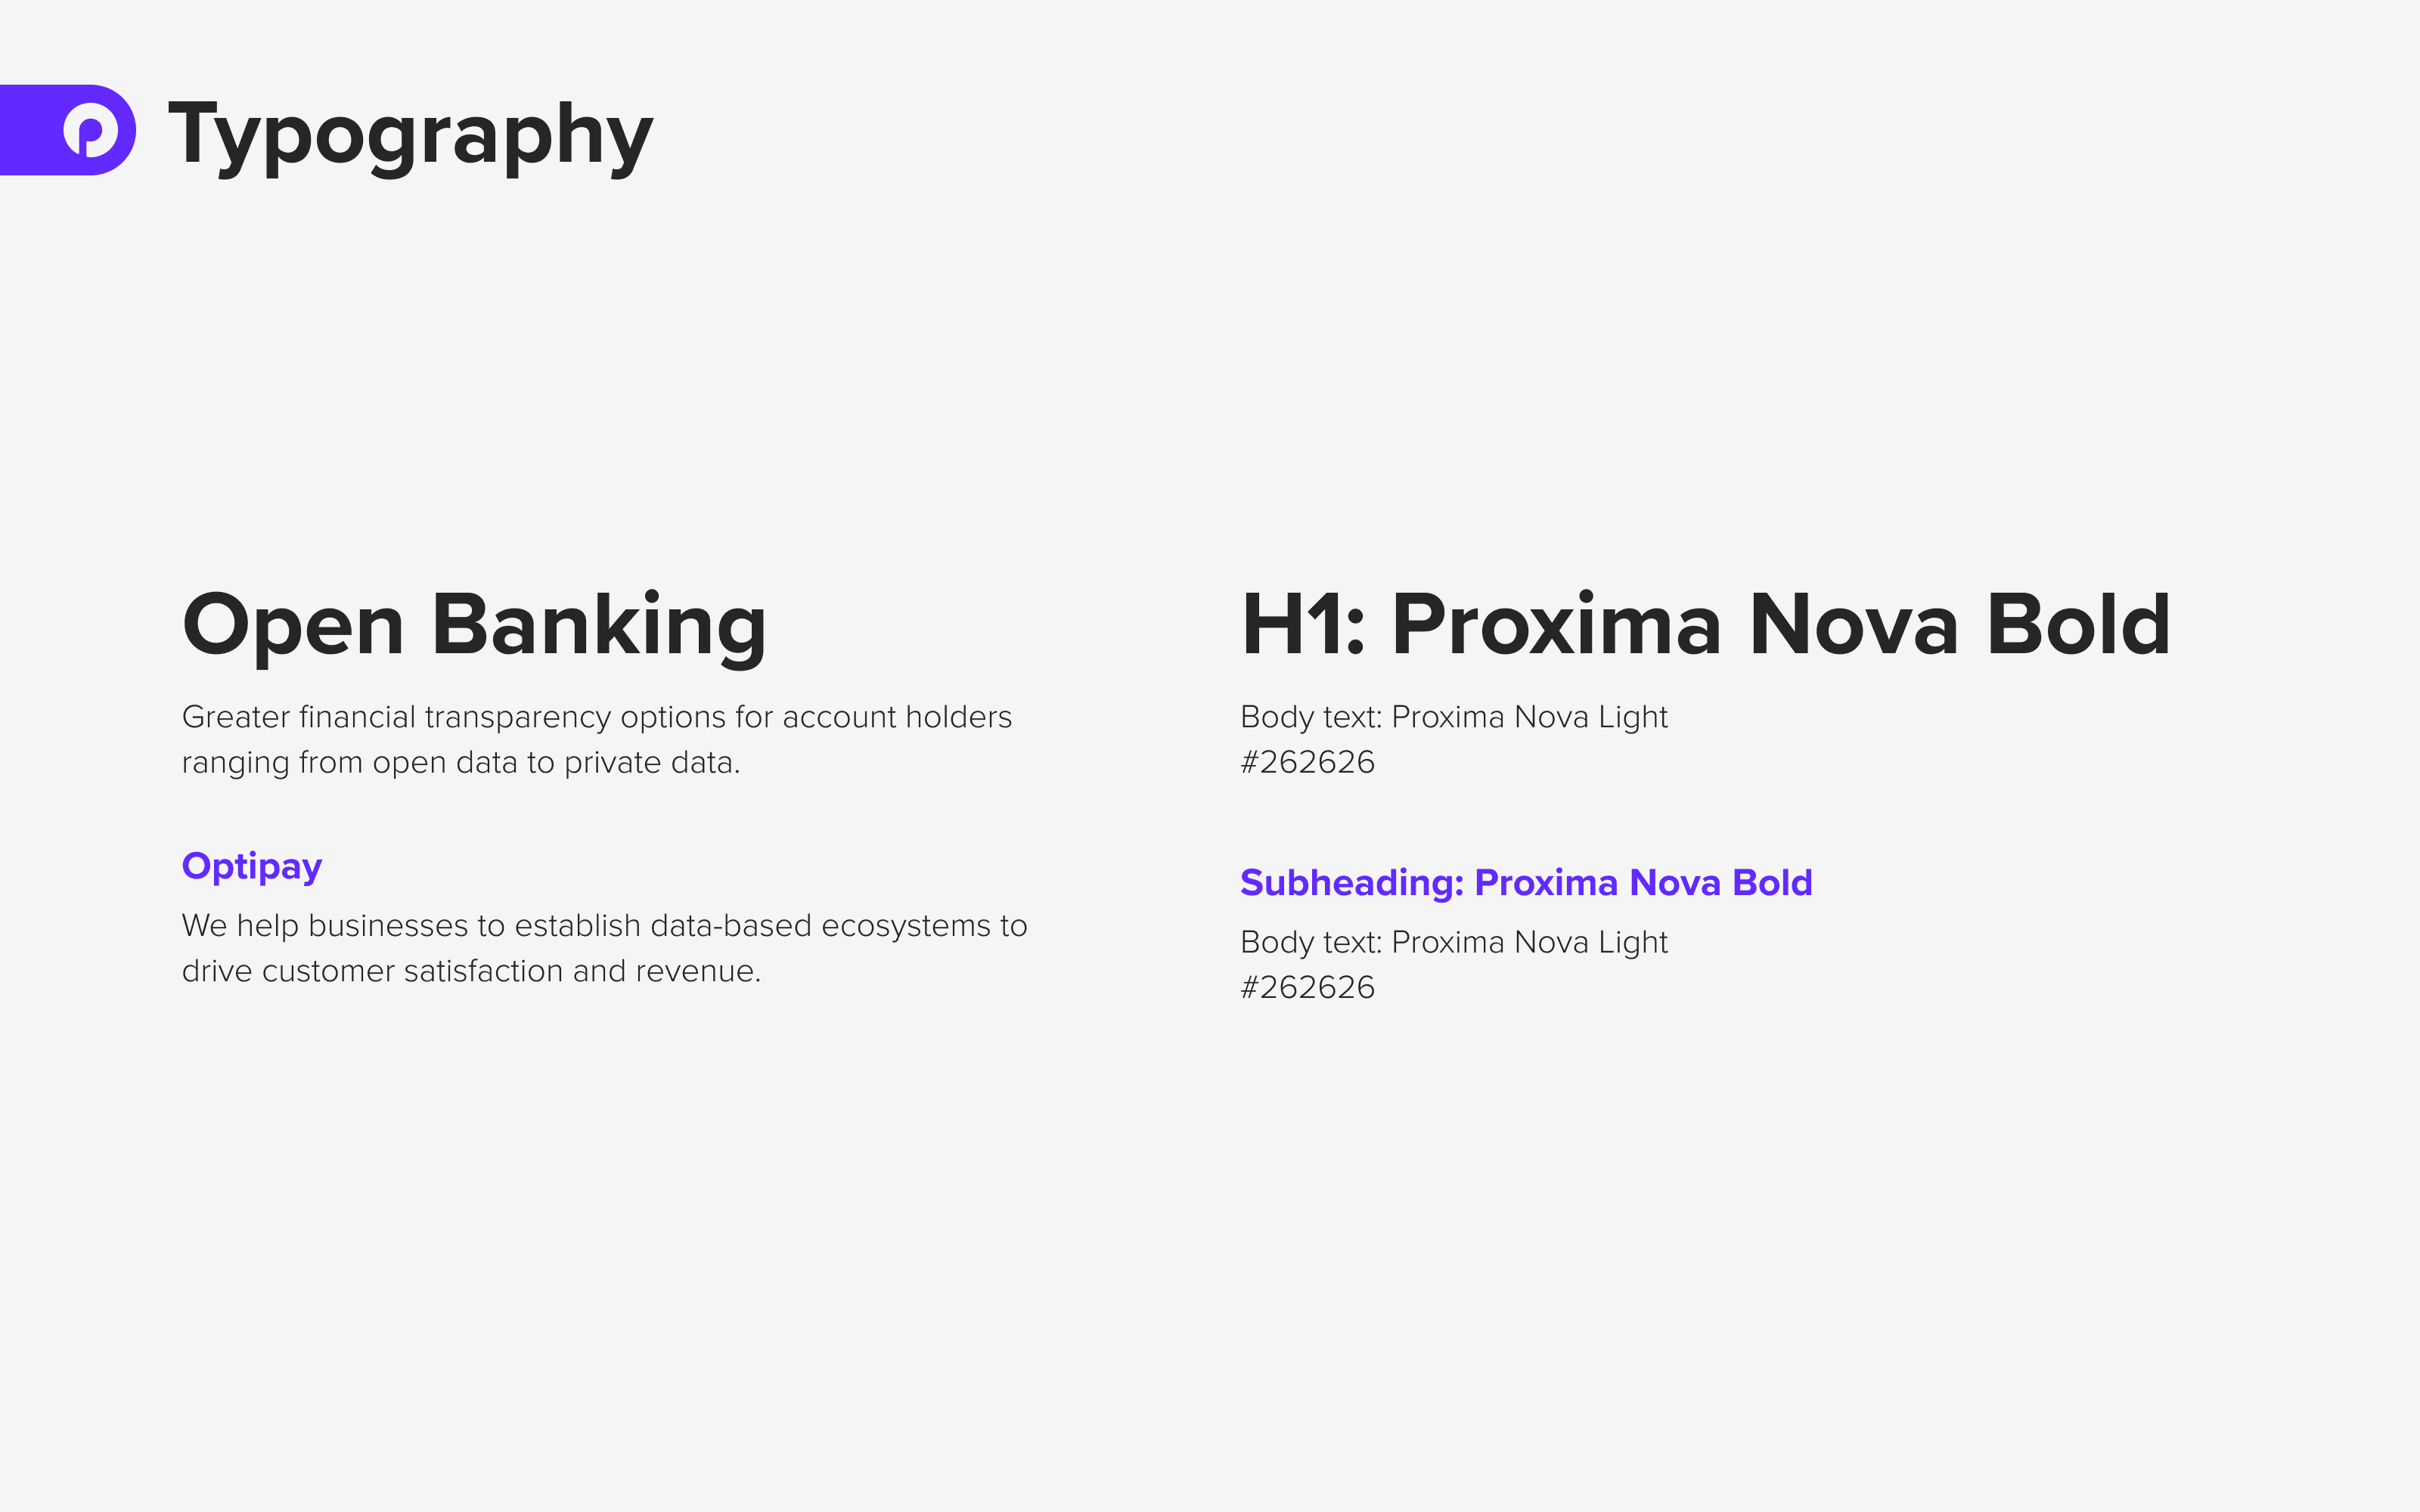 Typography example. Title: Open Banking. Font: Proxima Nova Bold Body: Greater financial transparency options for account holders ranging from open data to private data. Font: Proxima Nova Light  Subheading in purple: Optipay Additional body text: We help businesses to establish data-based ecosystems to drive customer satisfaction and revenue.